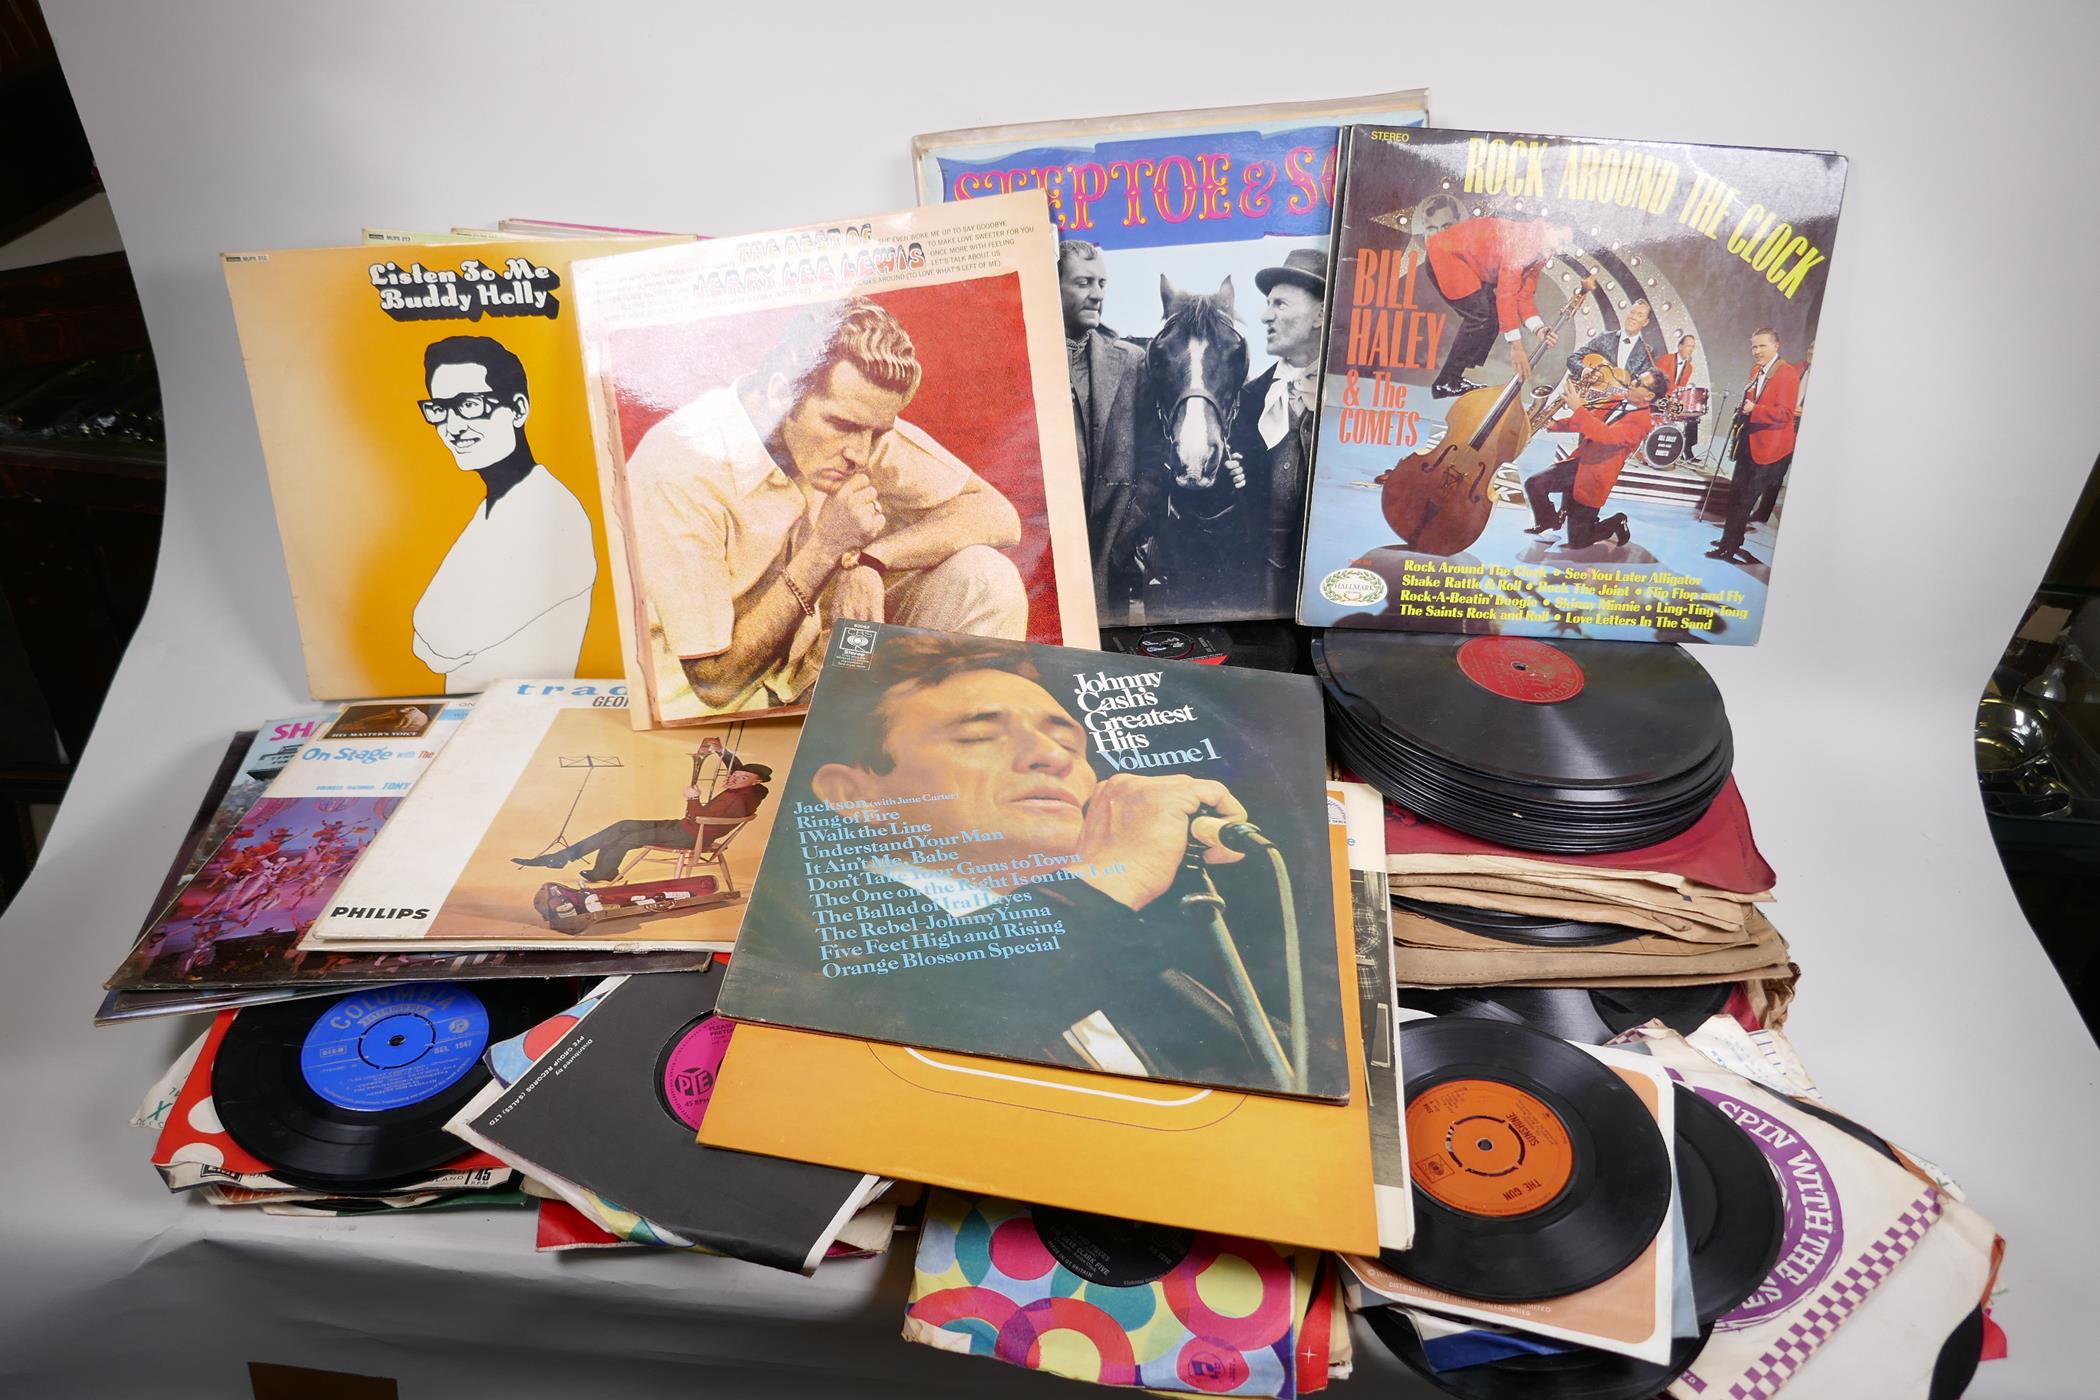 A quantity of records including LPs, 45s and 78s, featuring Buddy Holly, Gerry Lee Lewis etc